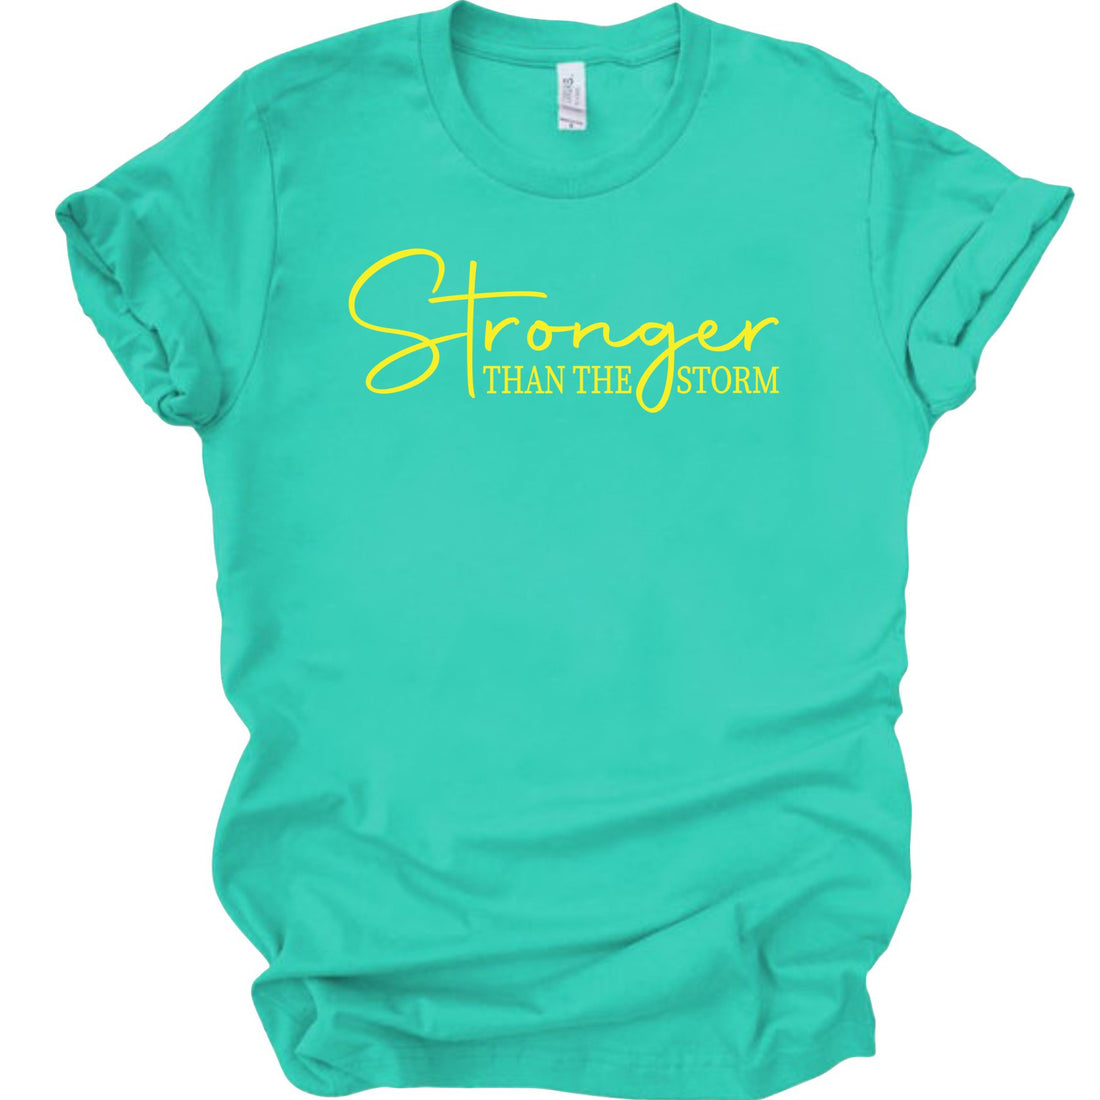 Profyle District - Stronger Than The Storm - T-Shirts - Teal